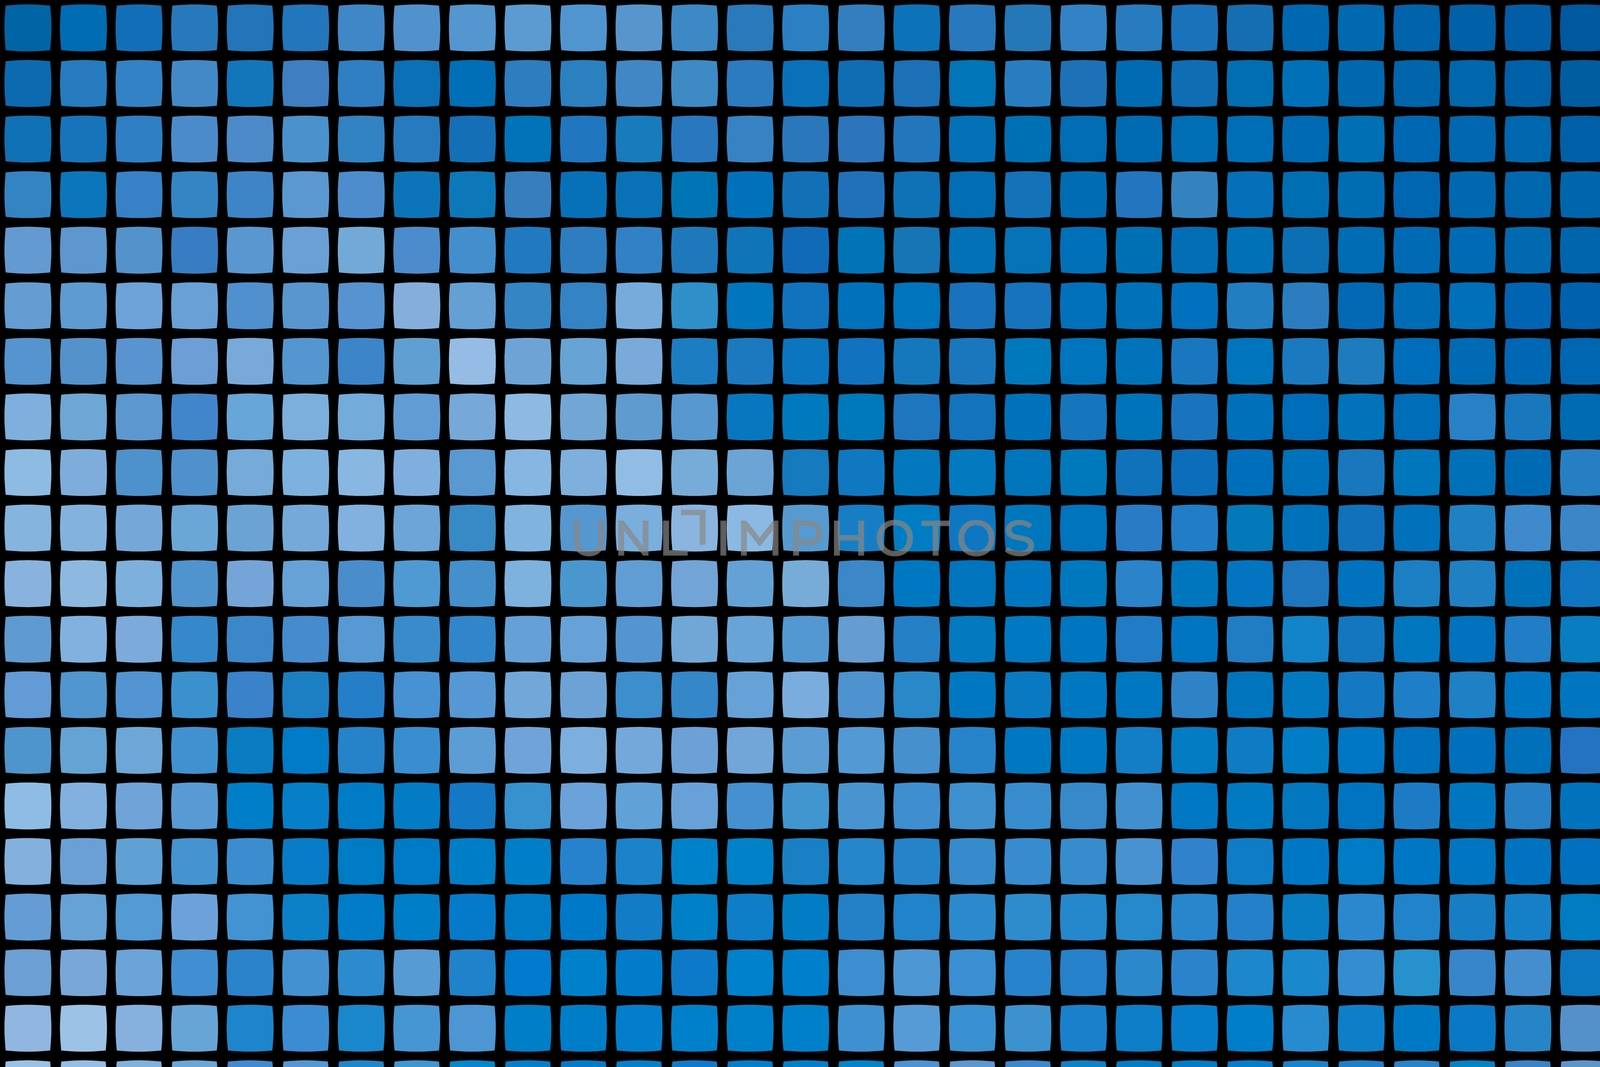 The Abstract mosaic blue background with square tiles over black, vertical format.